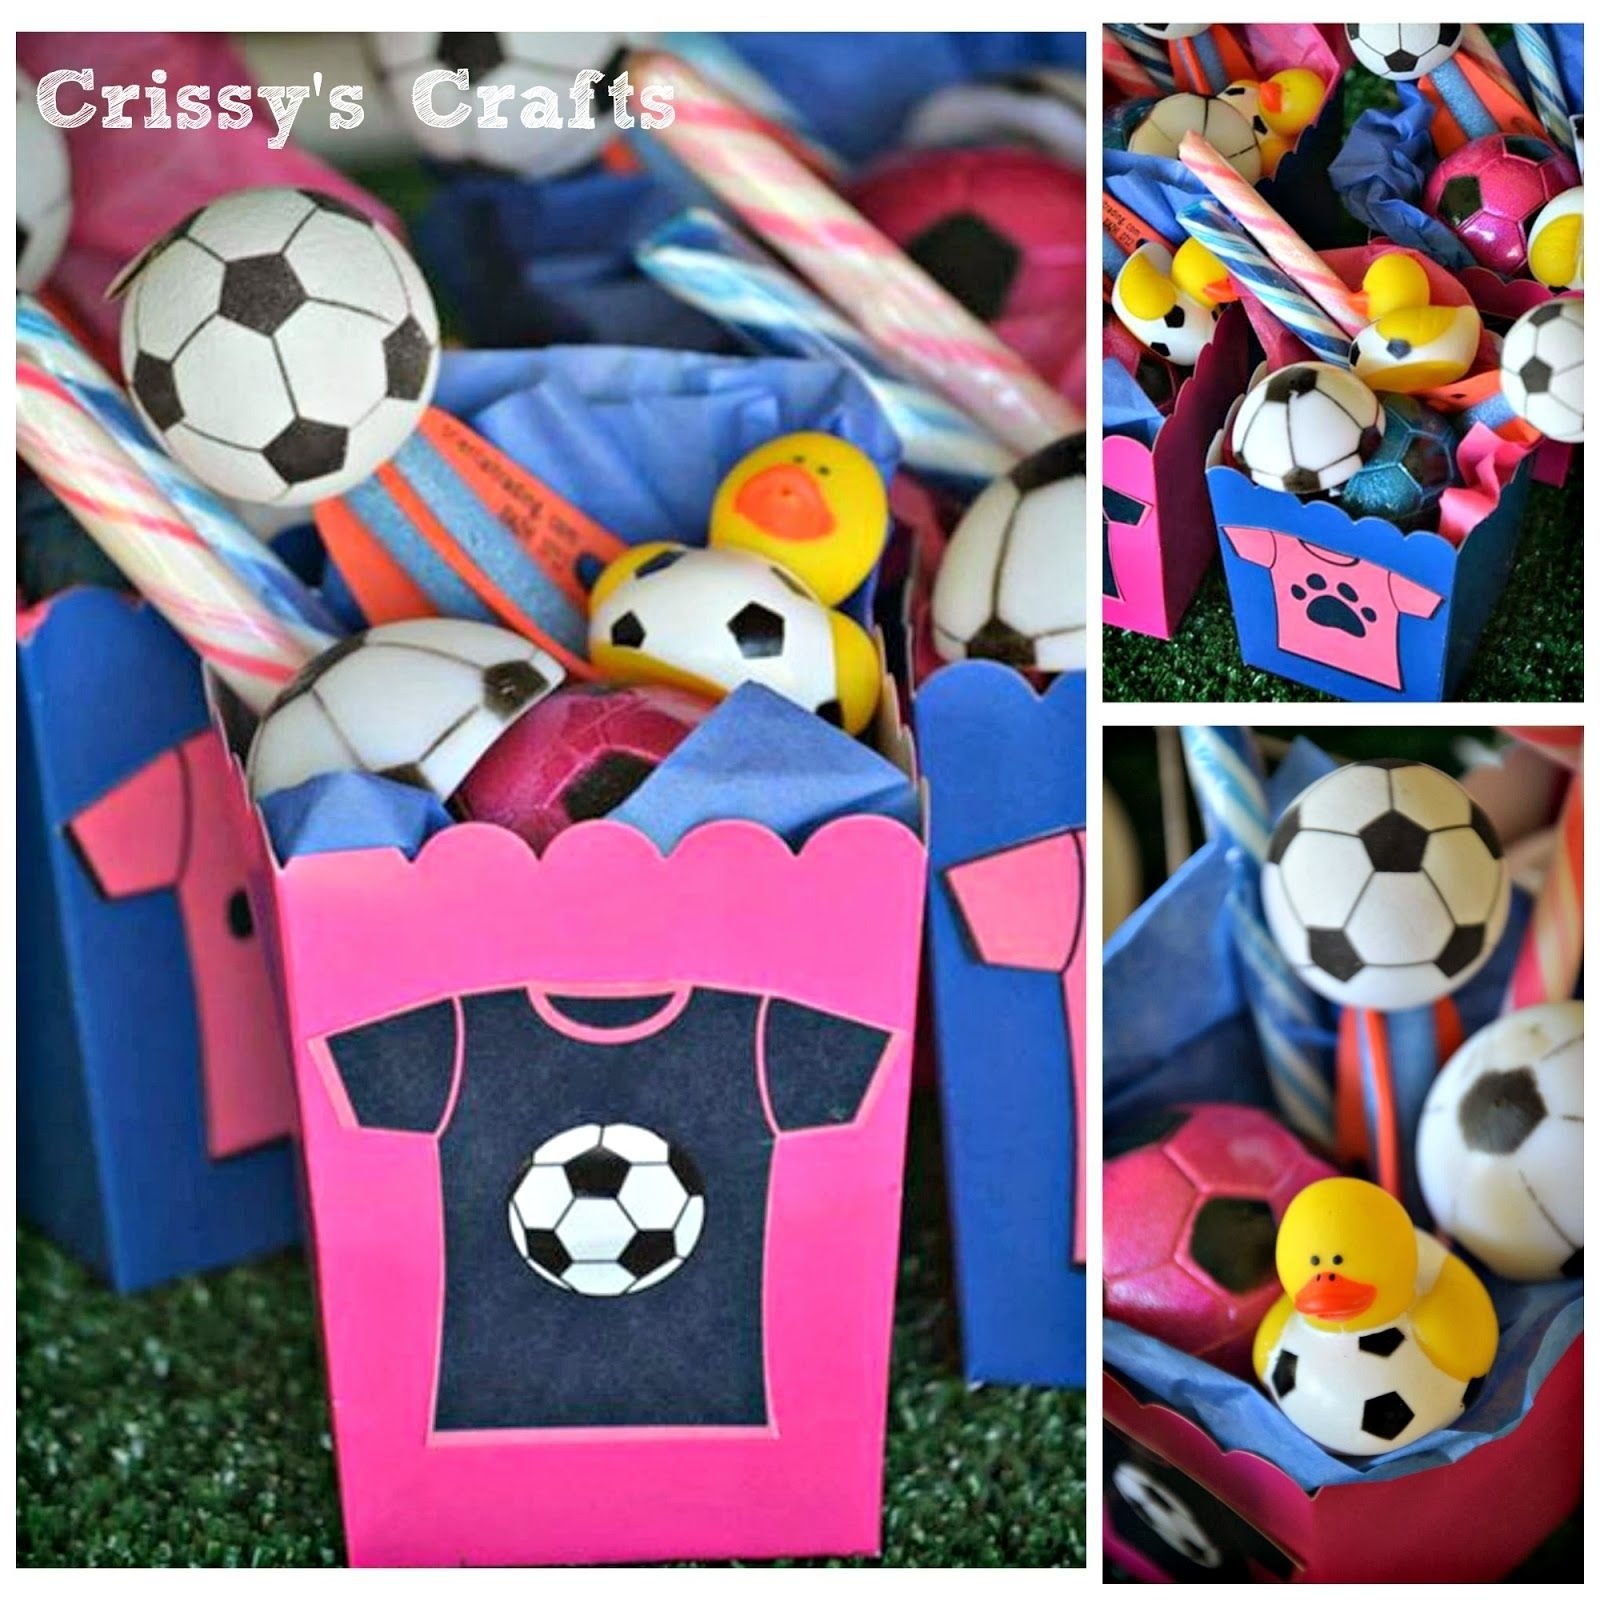 10 Nice End Of Season Soccer Party Ideas crissys crafts end of the season soccer party soccer party 1 2023